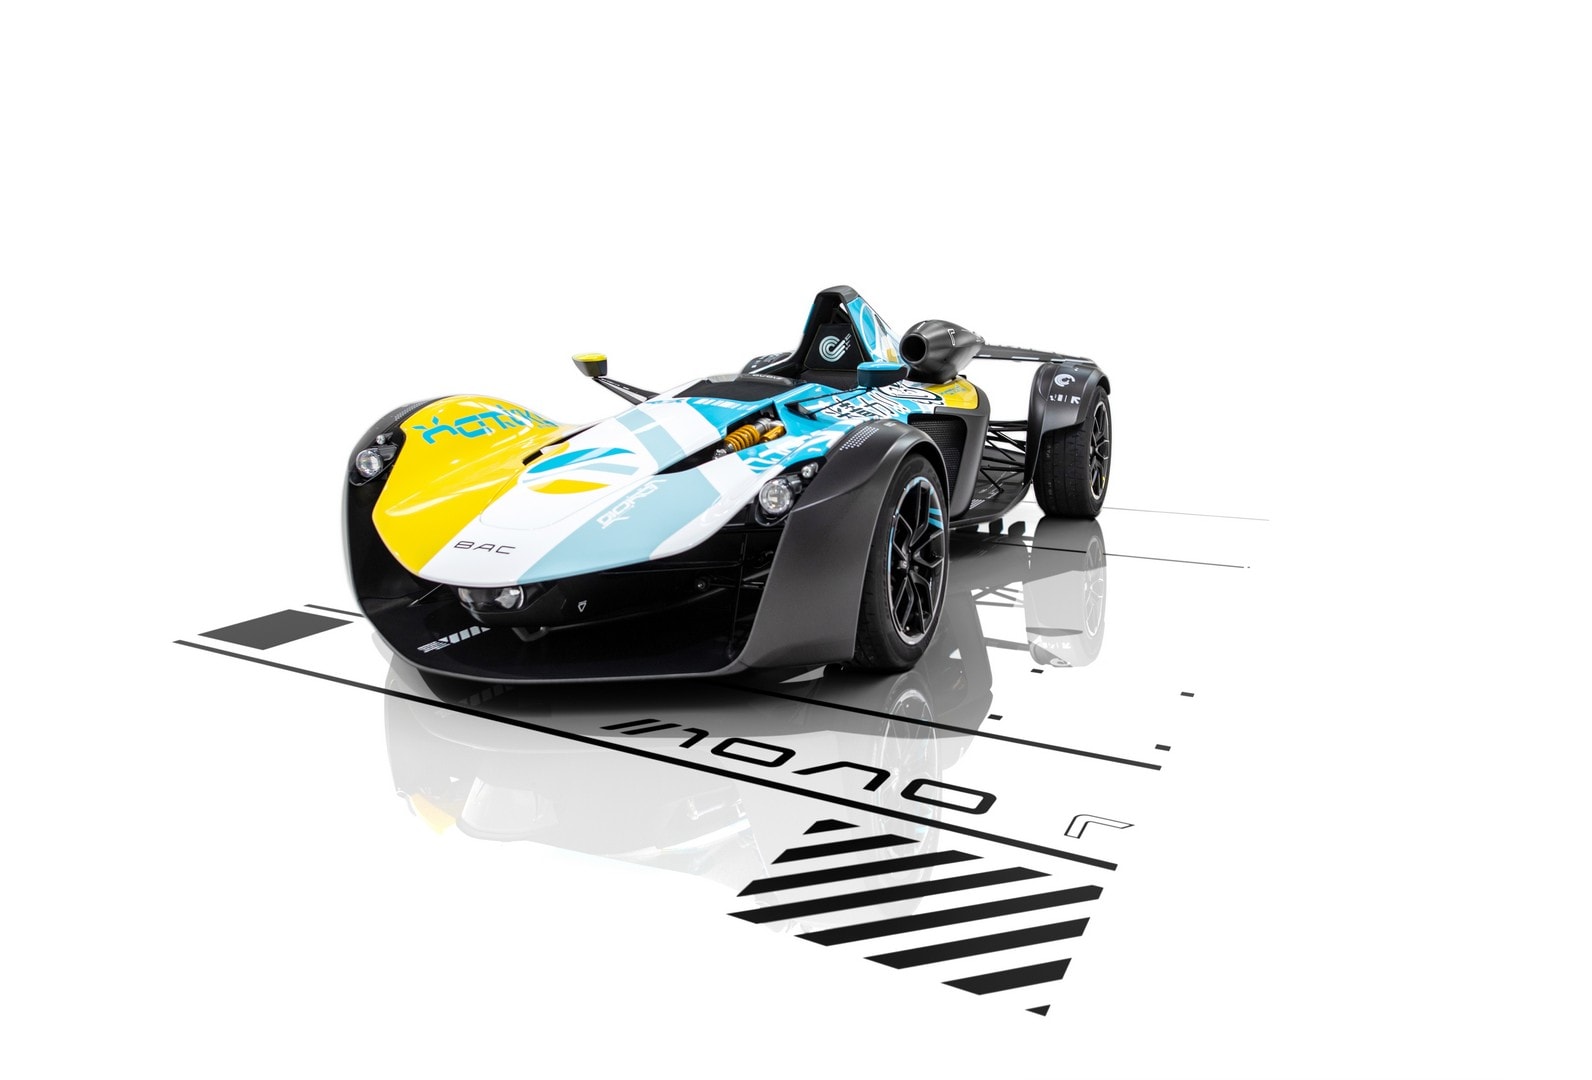 First BAC Mono R Is Painted Out of This World Into Anti